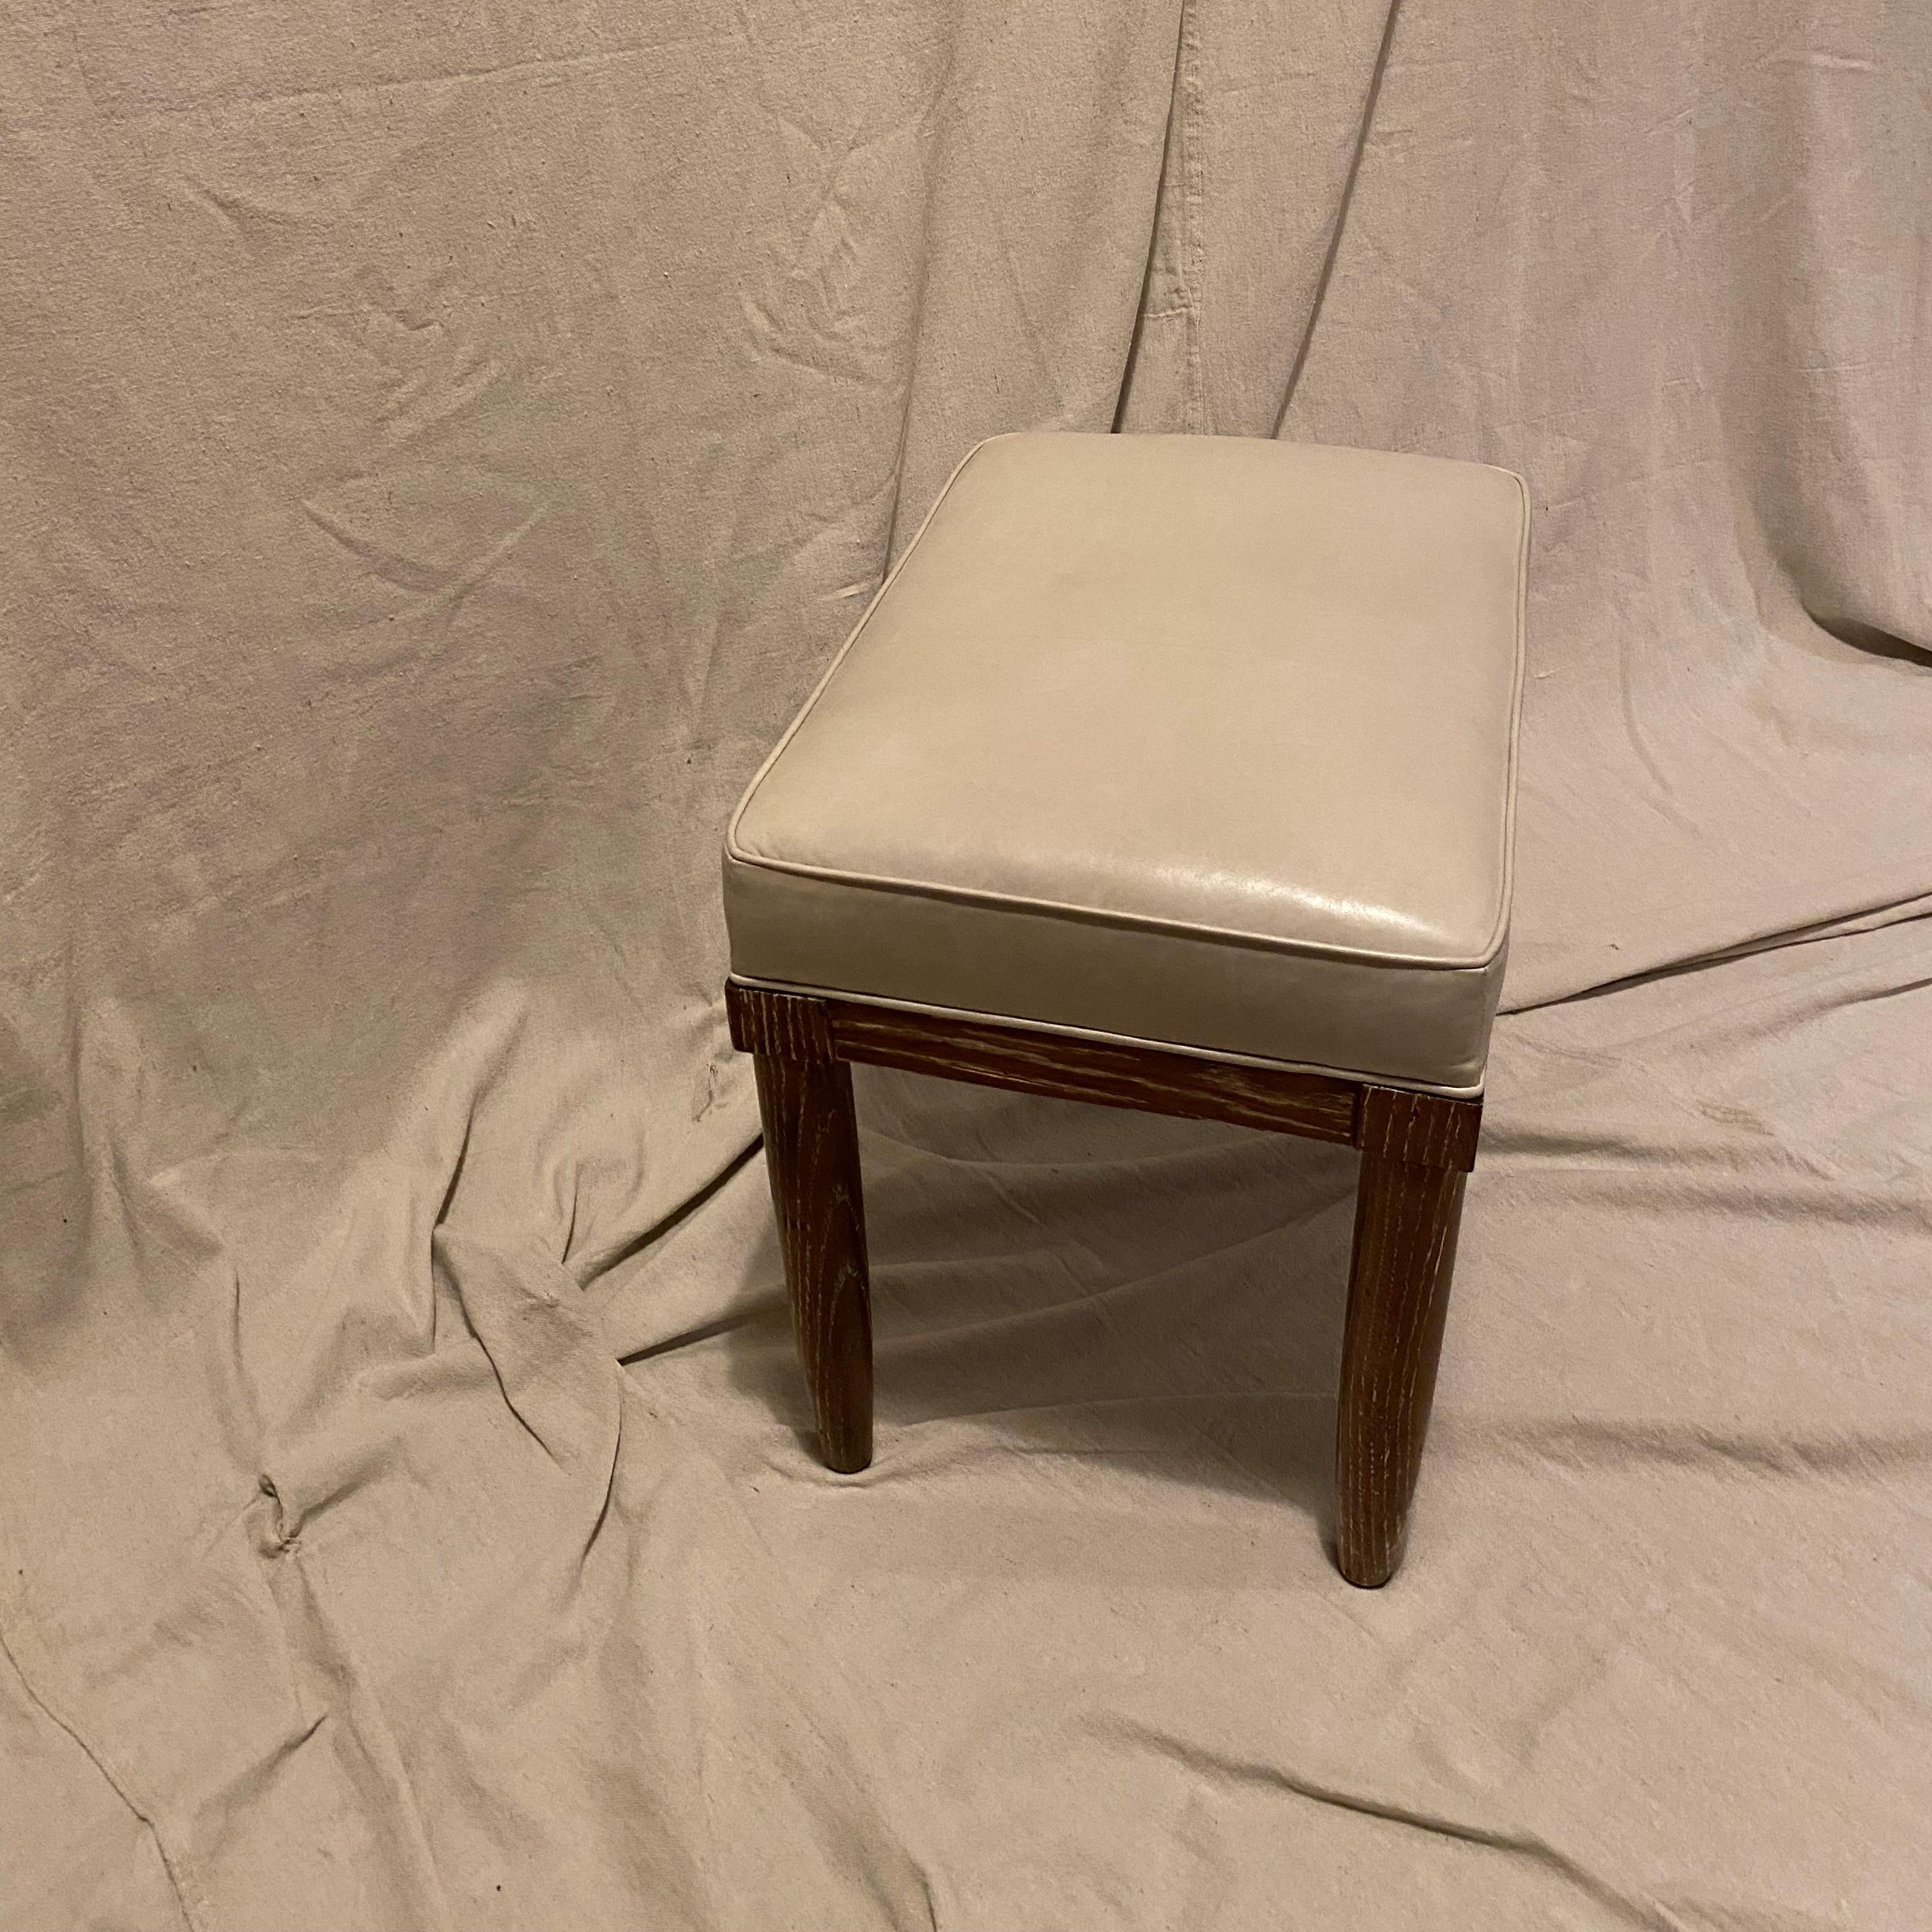 Cerused Late 1940's Moderne / Deco Footstool or Ottoman  For Sale